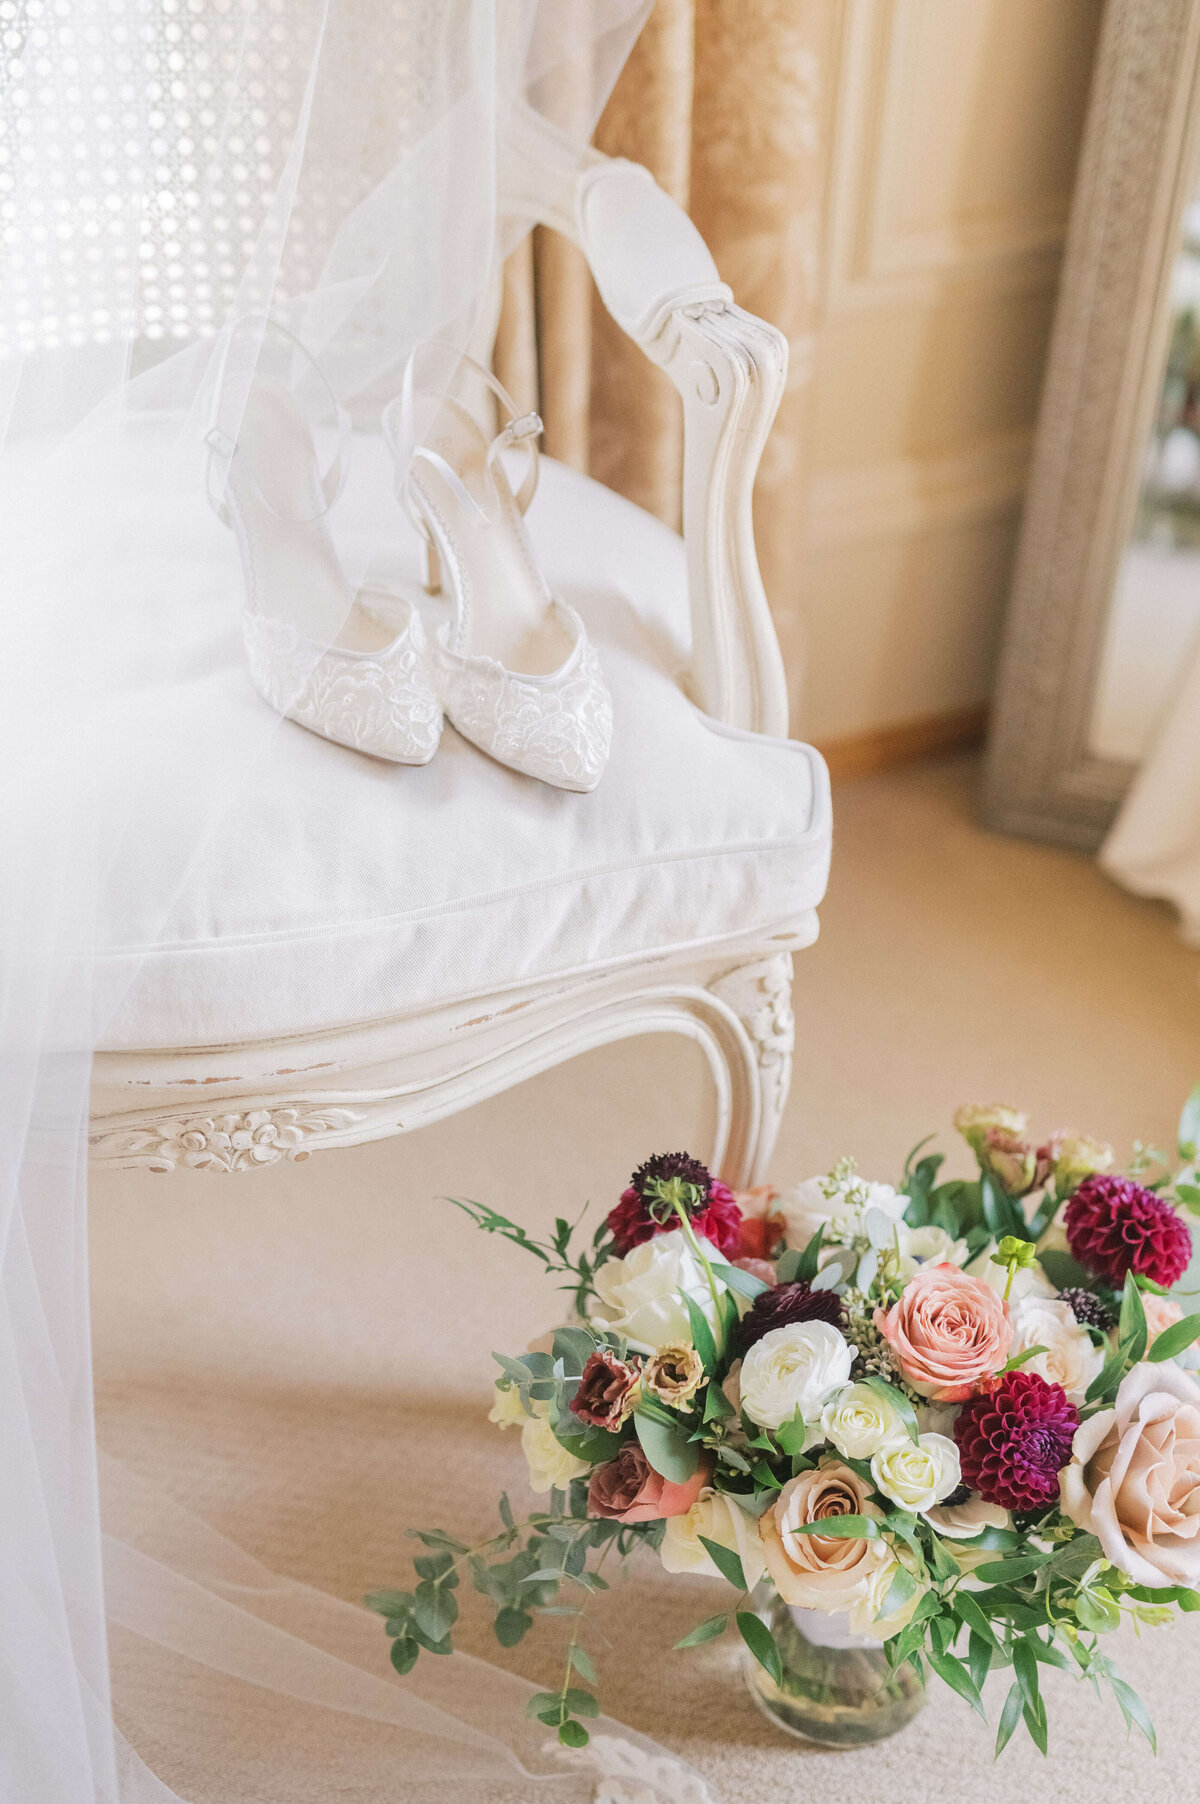 Bella Belle wedding shoes sitting on chair with bouquet styled for wedding photography by Rachael Mattio